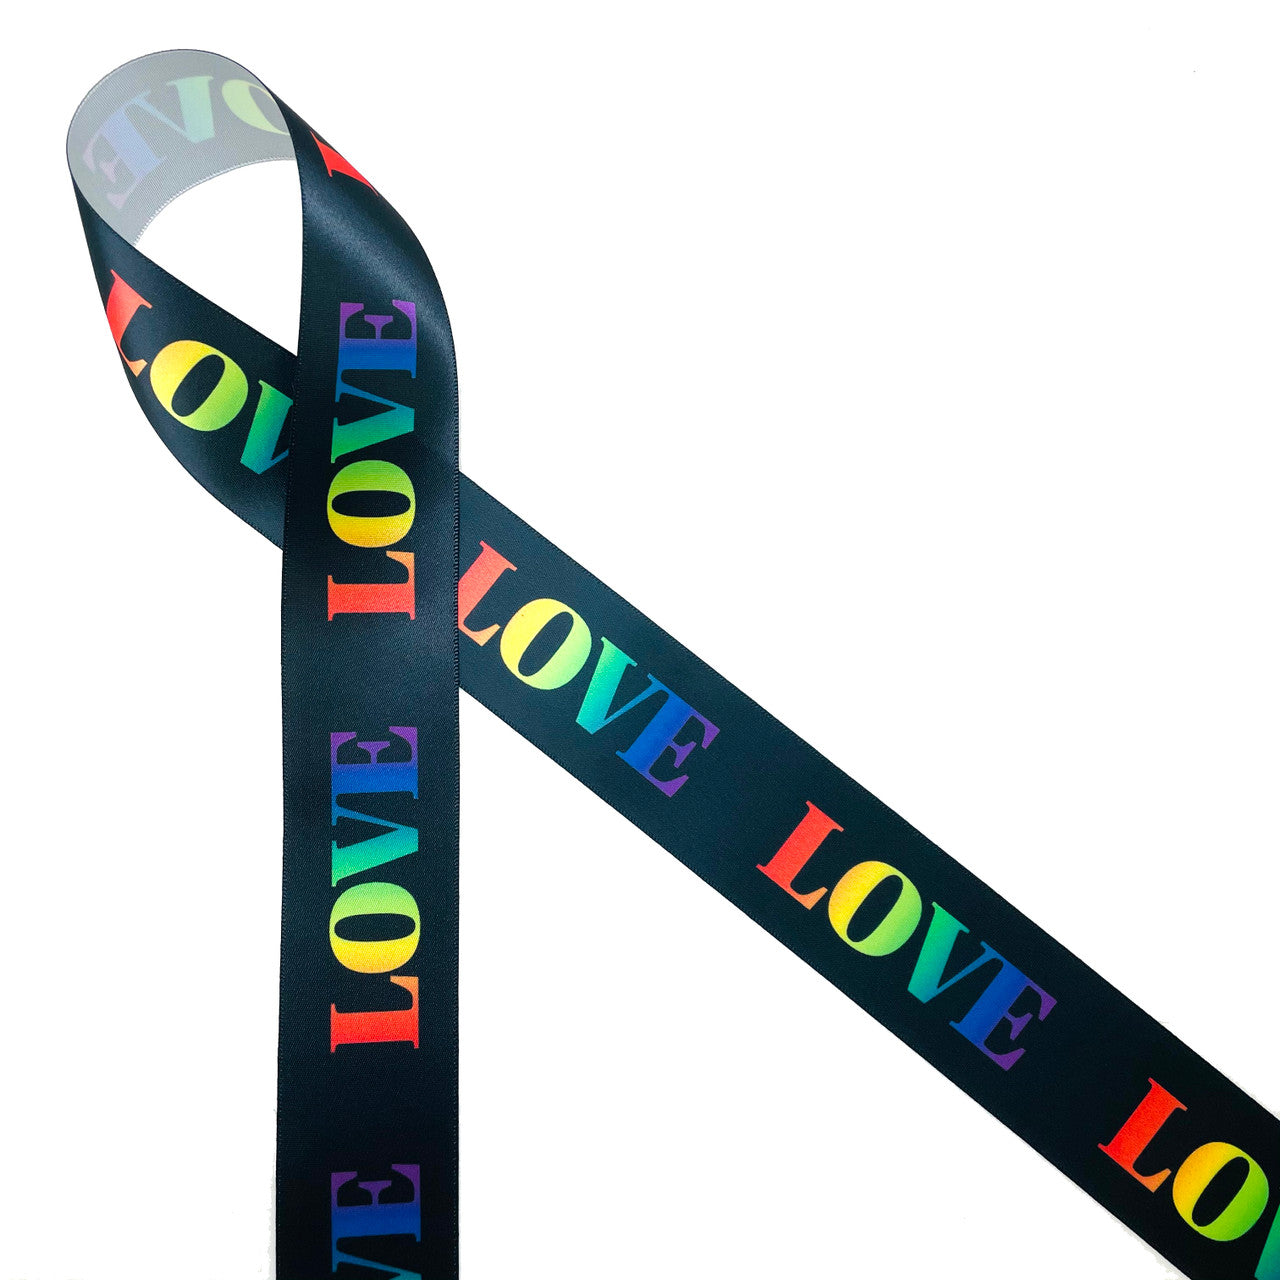 Love in Rainbow colors on a black background printed on 1.5" white single face satin  ribbon is an ideal ribbon for Valentine's Day, Galentine's Day, Pride Week,  and LBGTQ celebrations because love is love. This ribbon is perfect for gift wrap, party decor, wreaths, floral design, quilting and crafts. All our ribbon is designed and printed in the USA